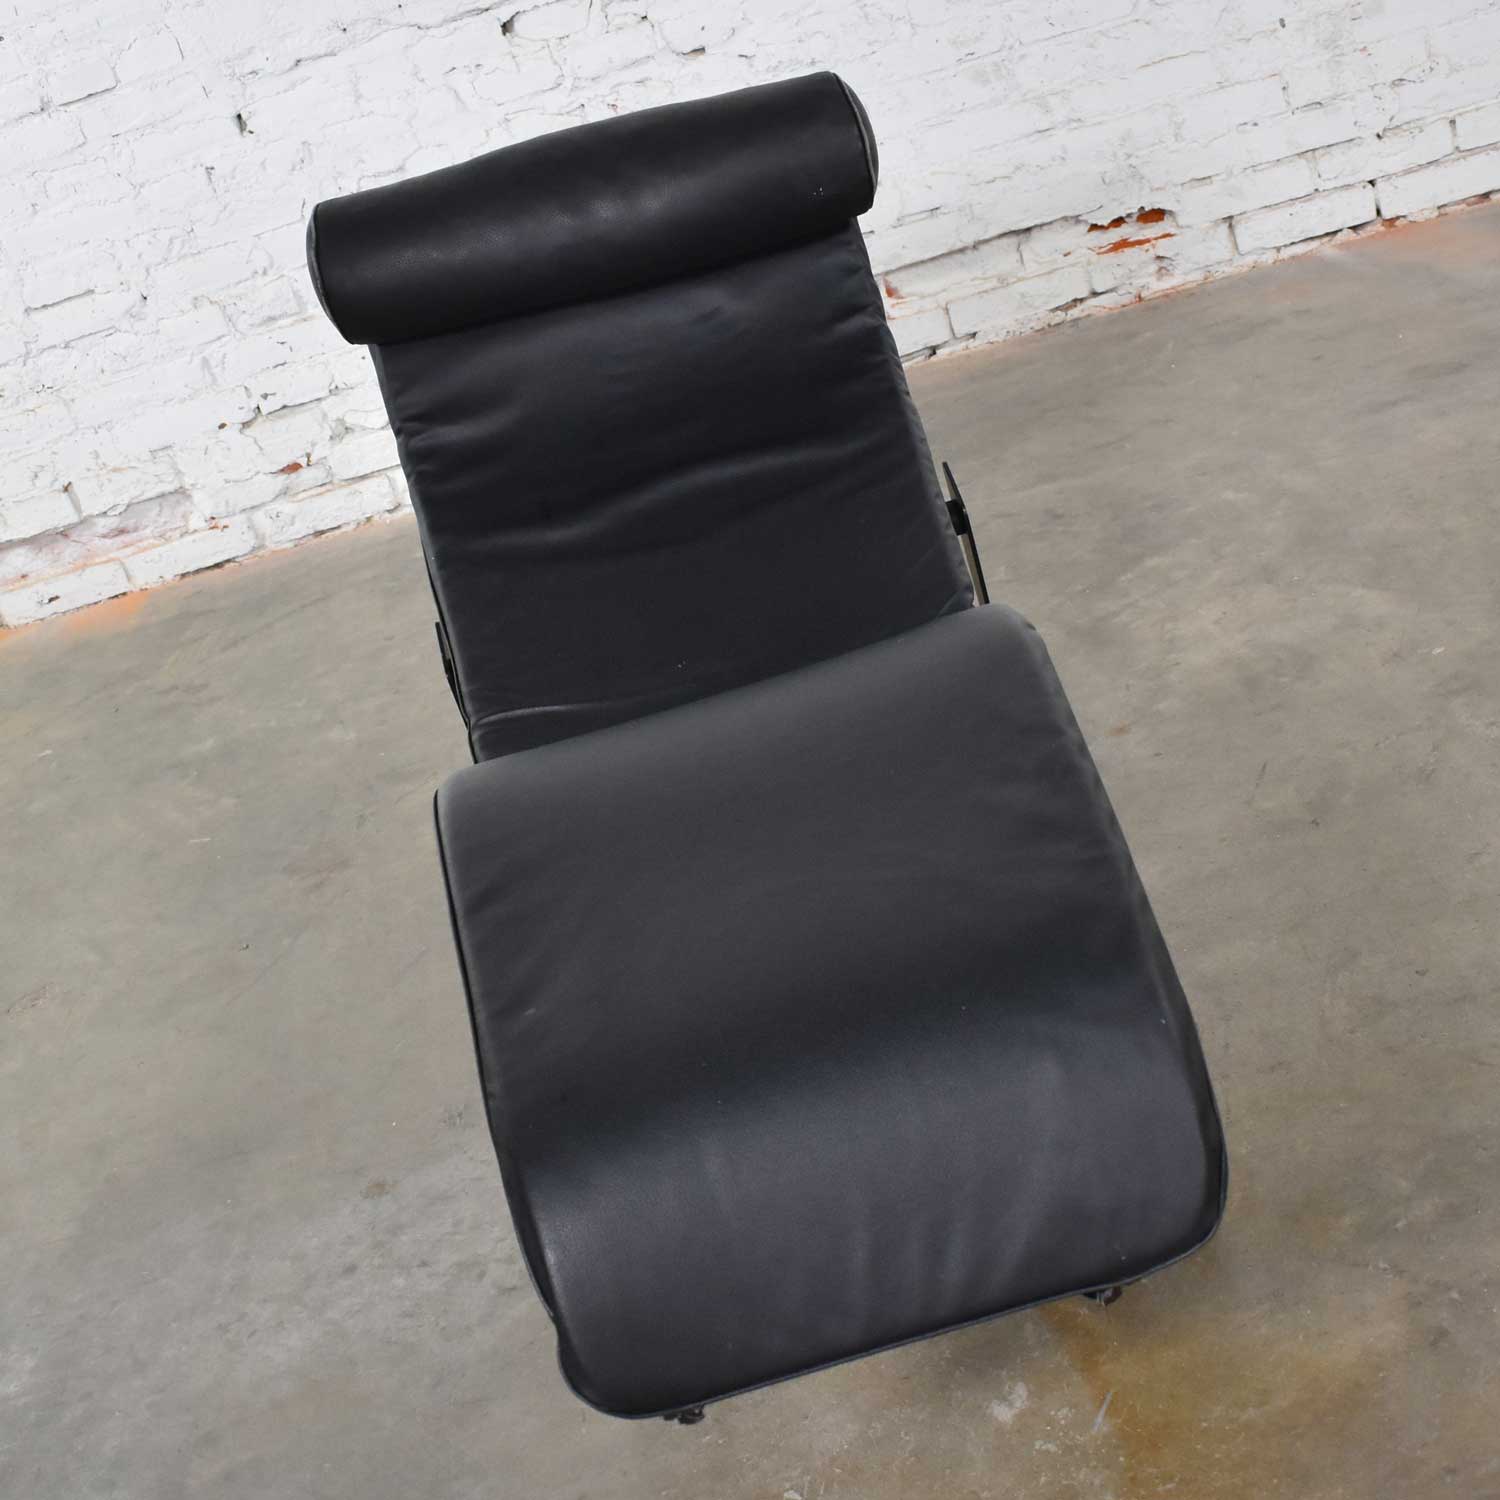 Le Corbusier LC4 Style Chaise Lounge with Black Leather Cushion by Unknown Maker